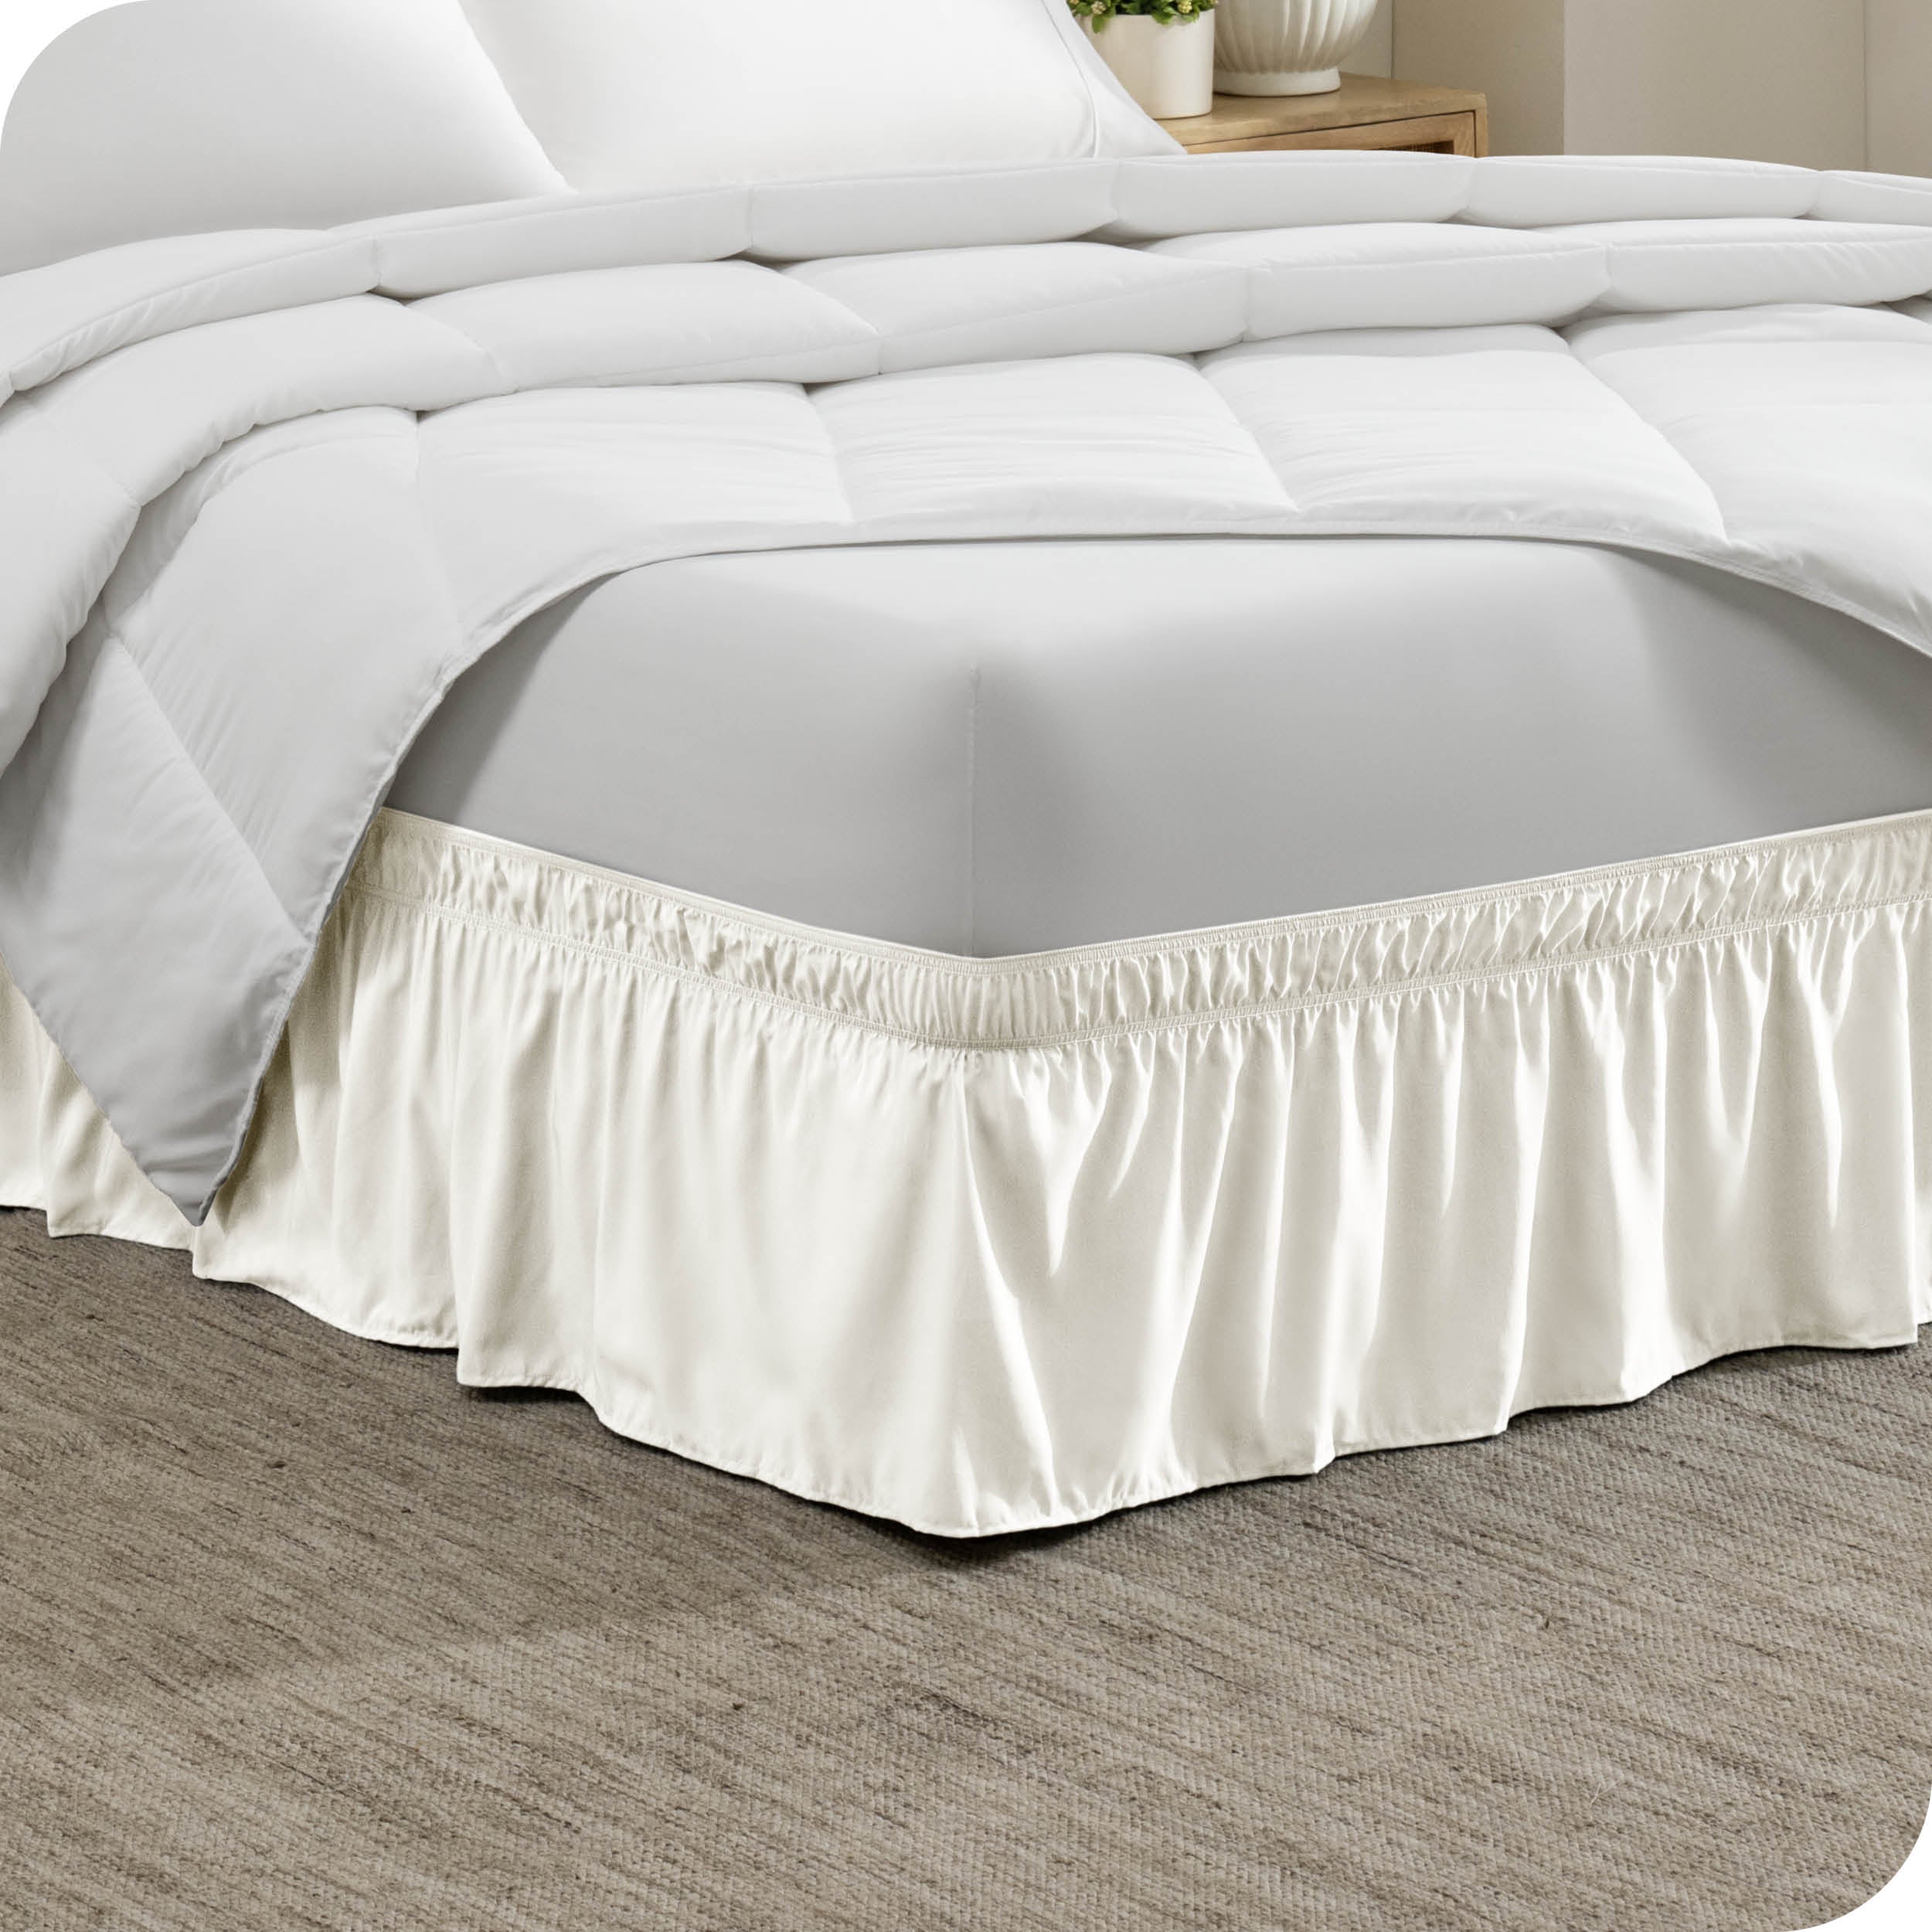 Corner of a bed with a polyester wrap around bed skirt on it